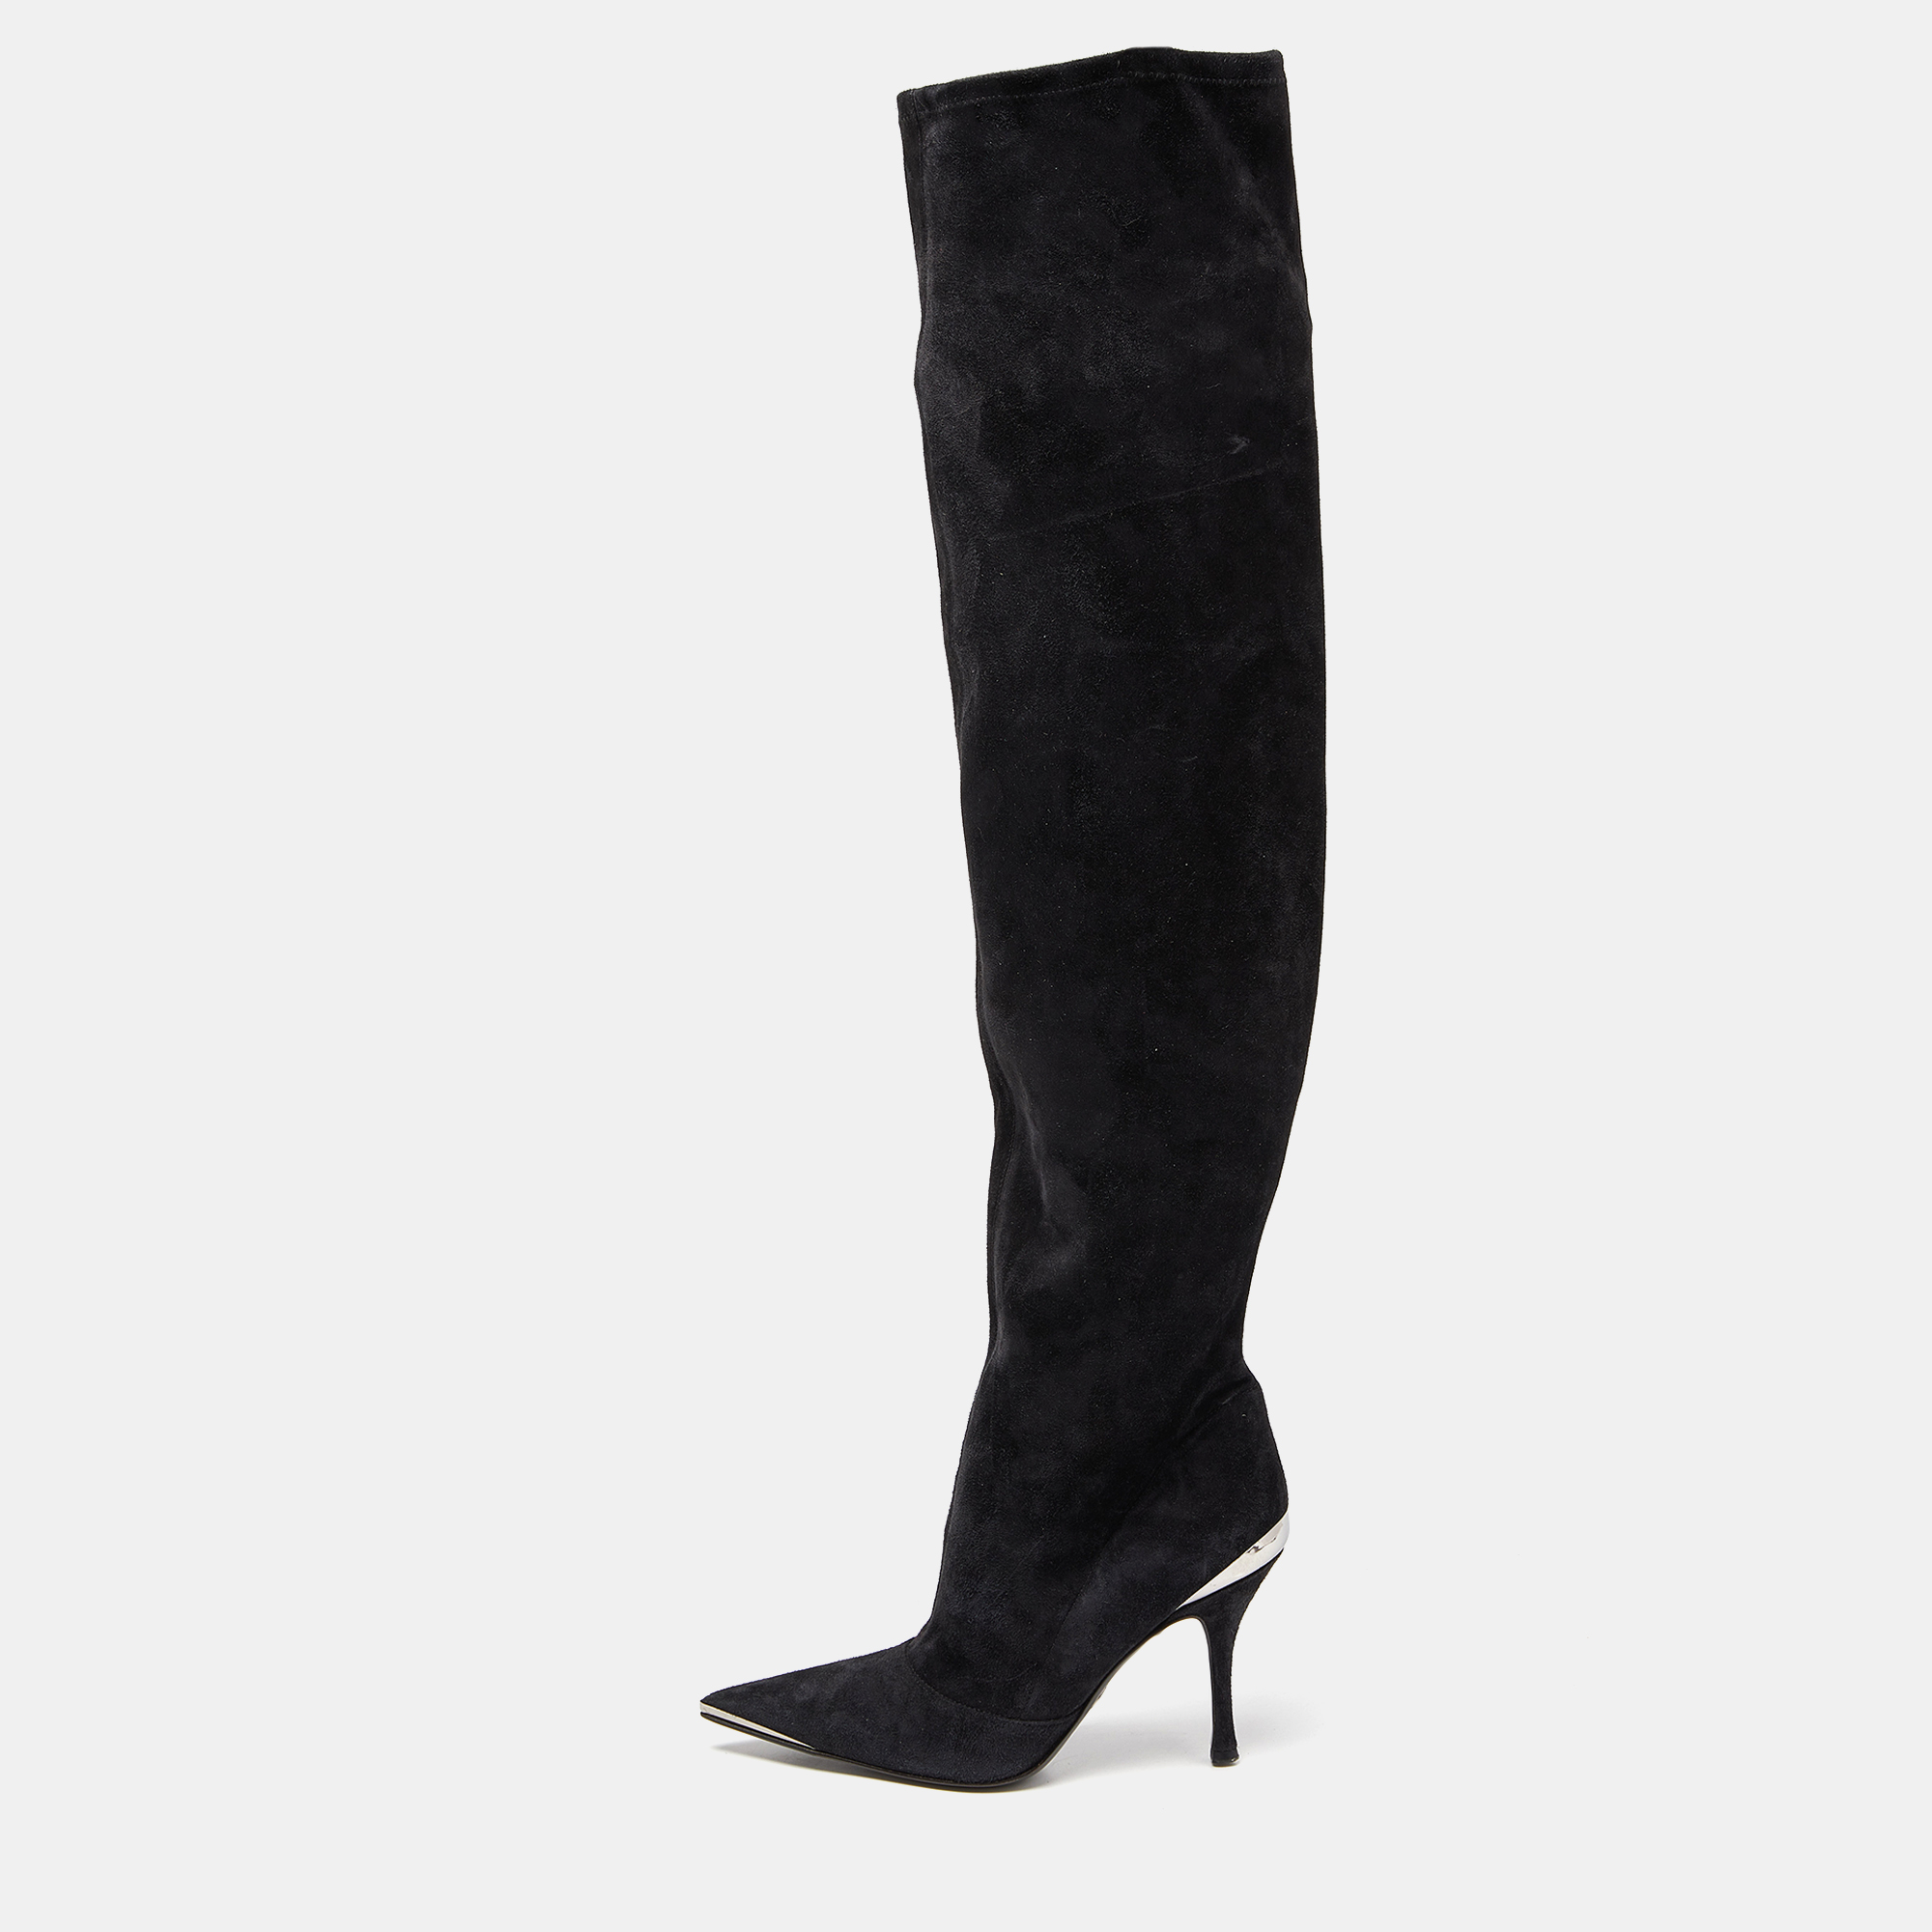 Get set to dazzle wherever you go with these over the knee boots from the house of Dolce and Gabbana. The black boots are crafted from suede and feature pointed toes and 10 cm heels.